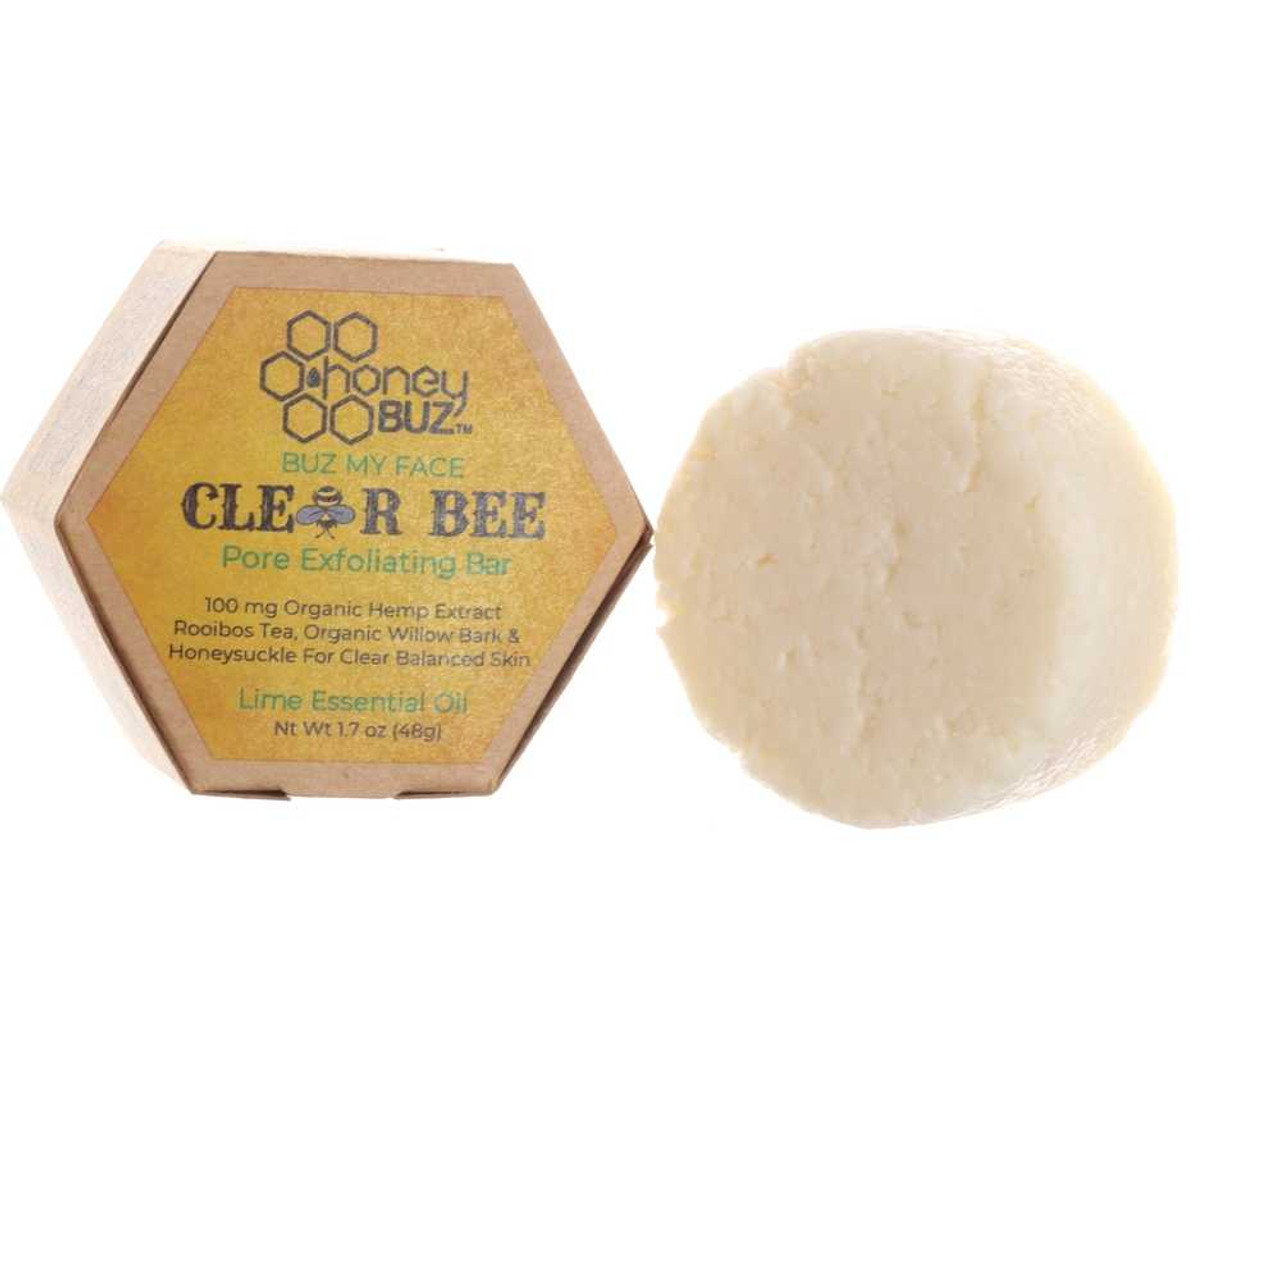 Clear Bee Pore Exfoliating Bar